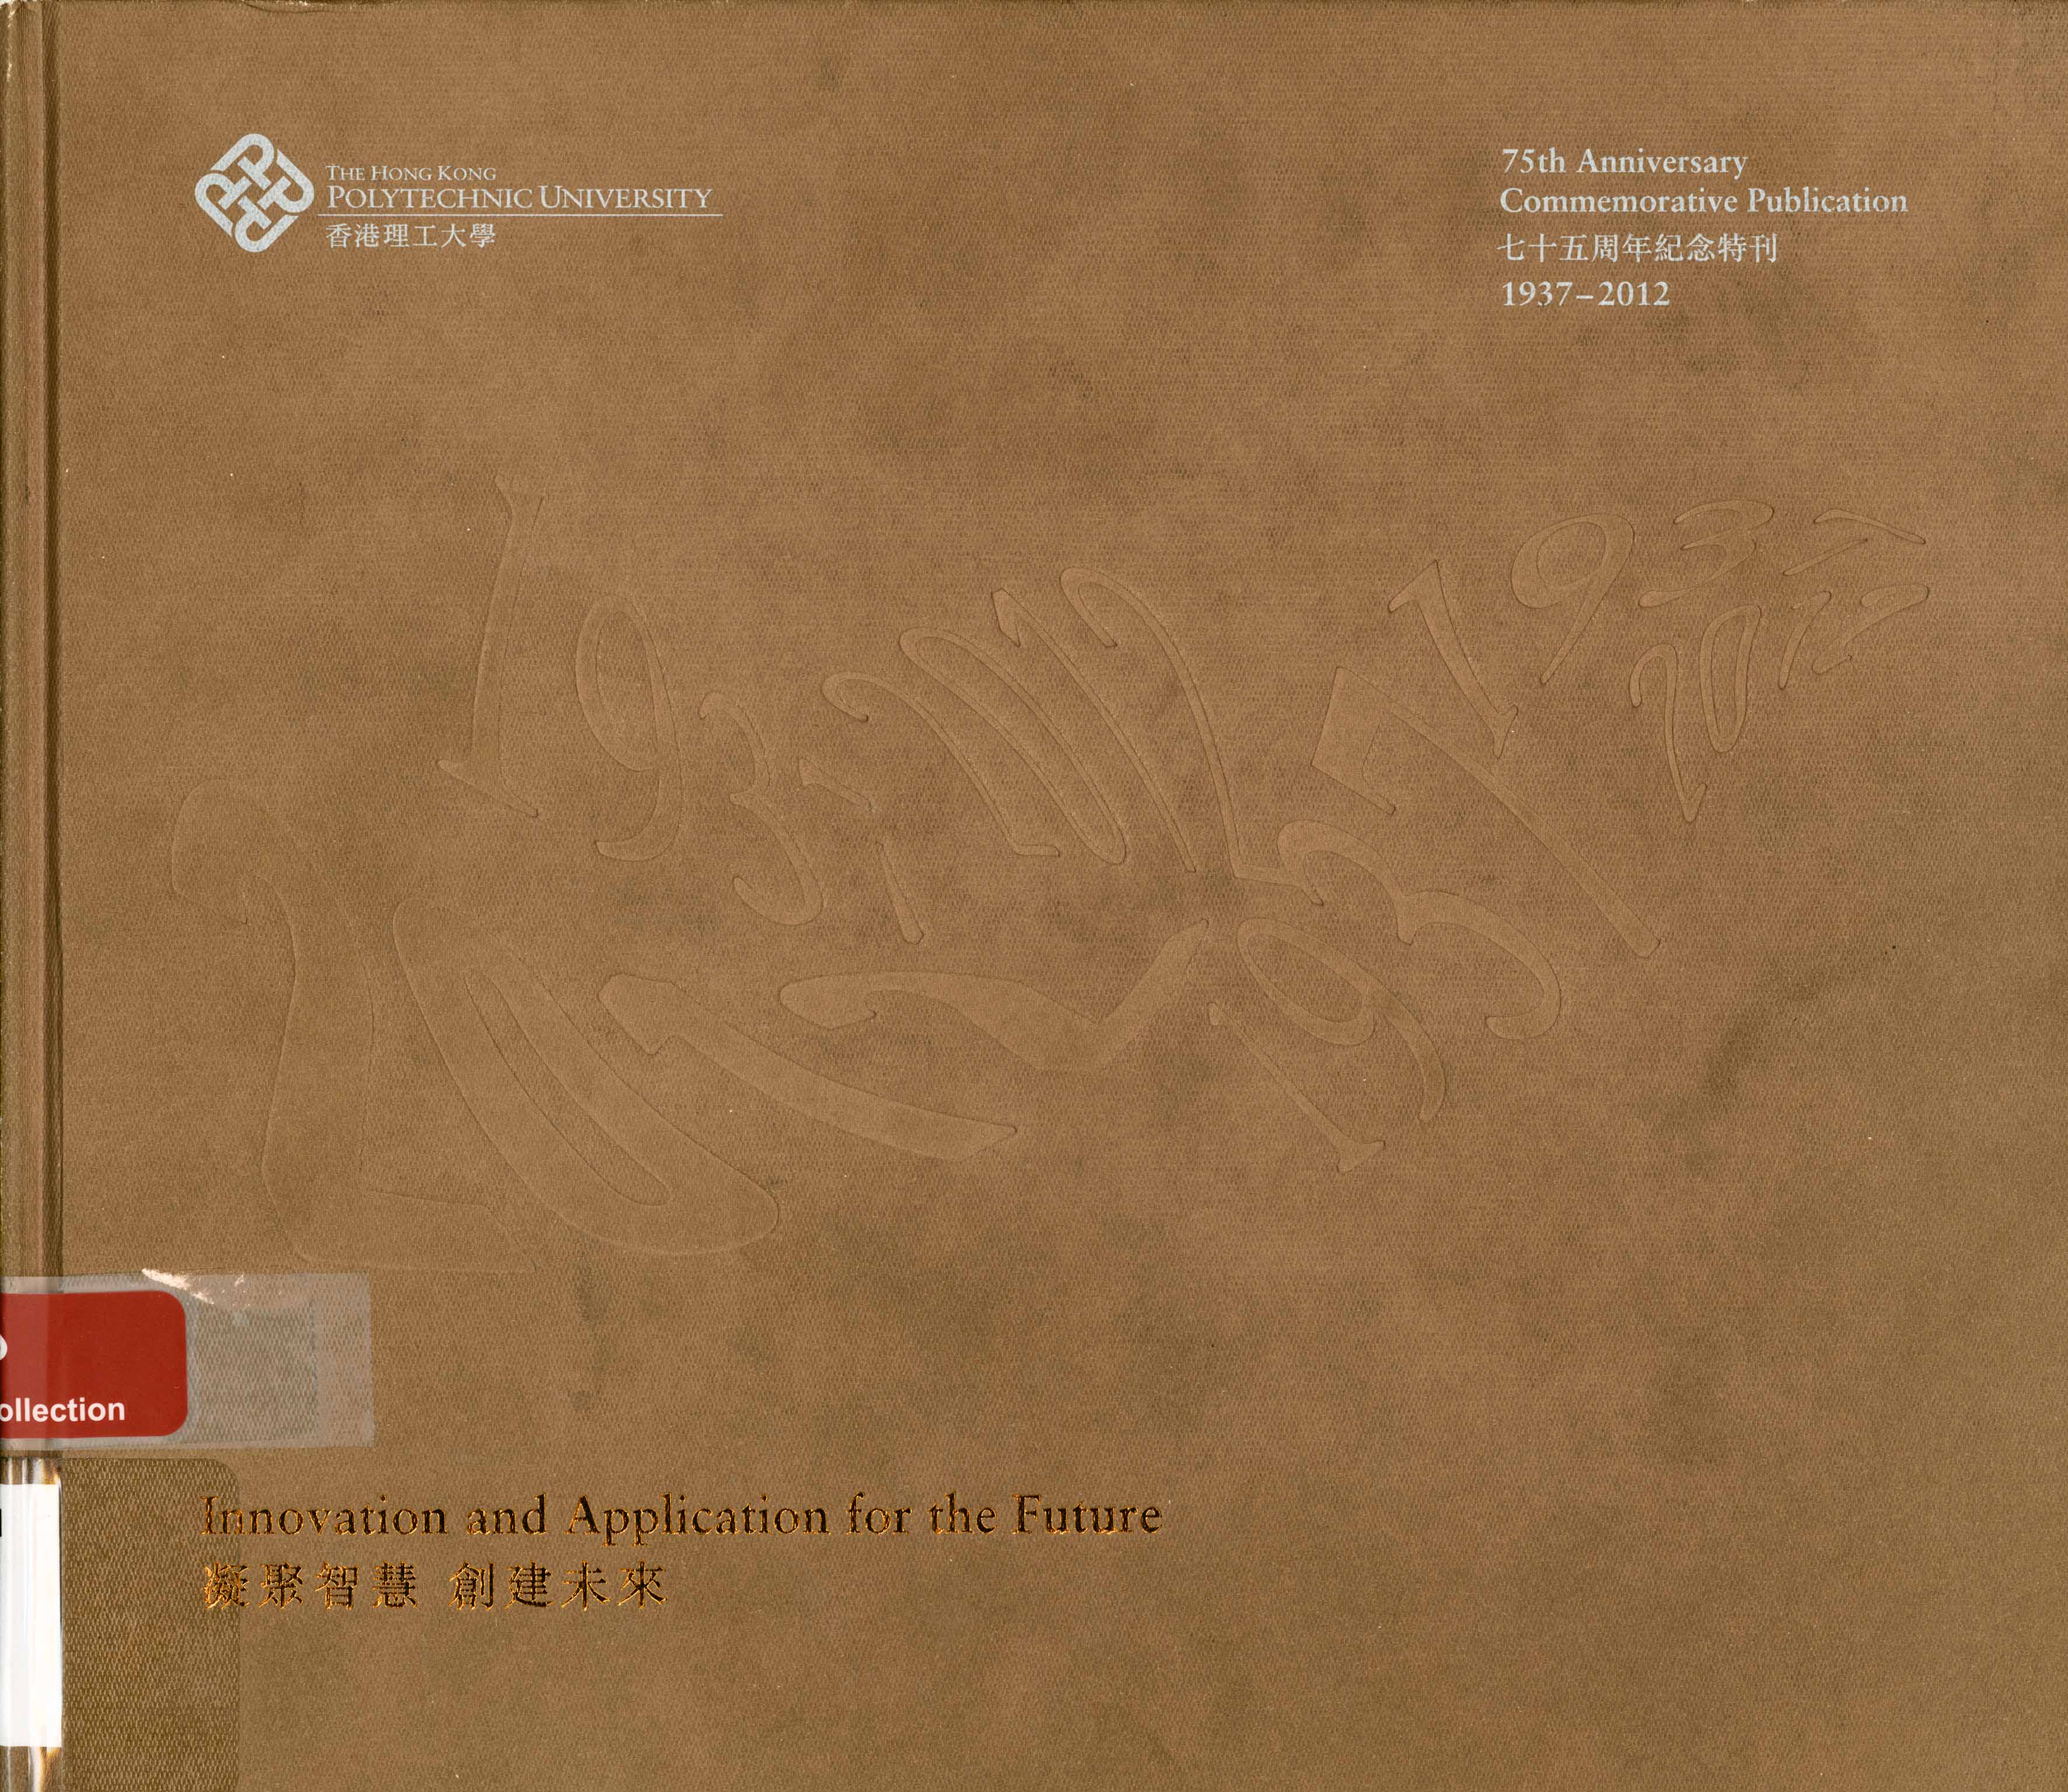 Innovation and application for the future : 75th anniversary commemorative publication 1937-2012